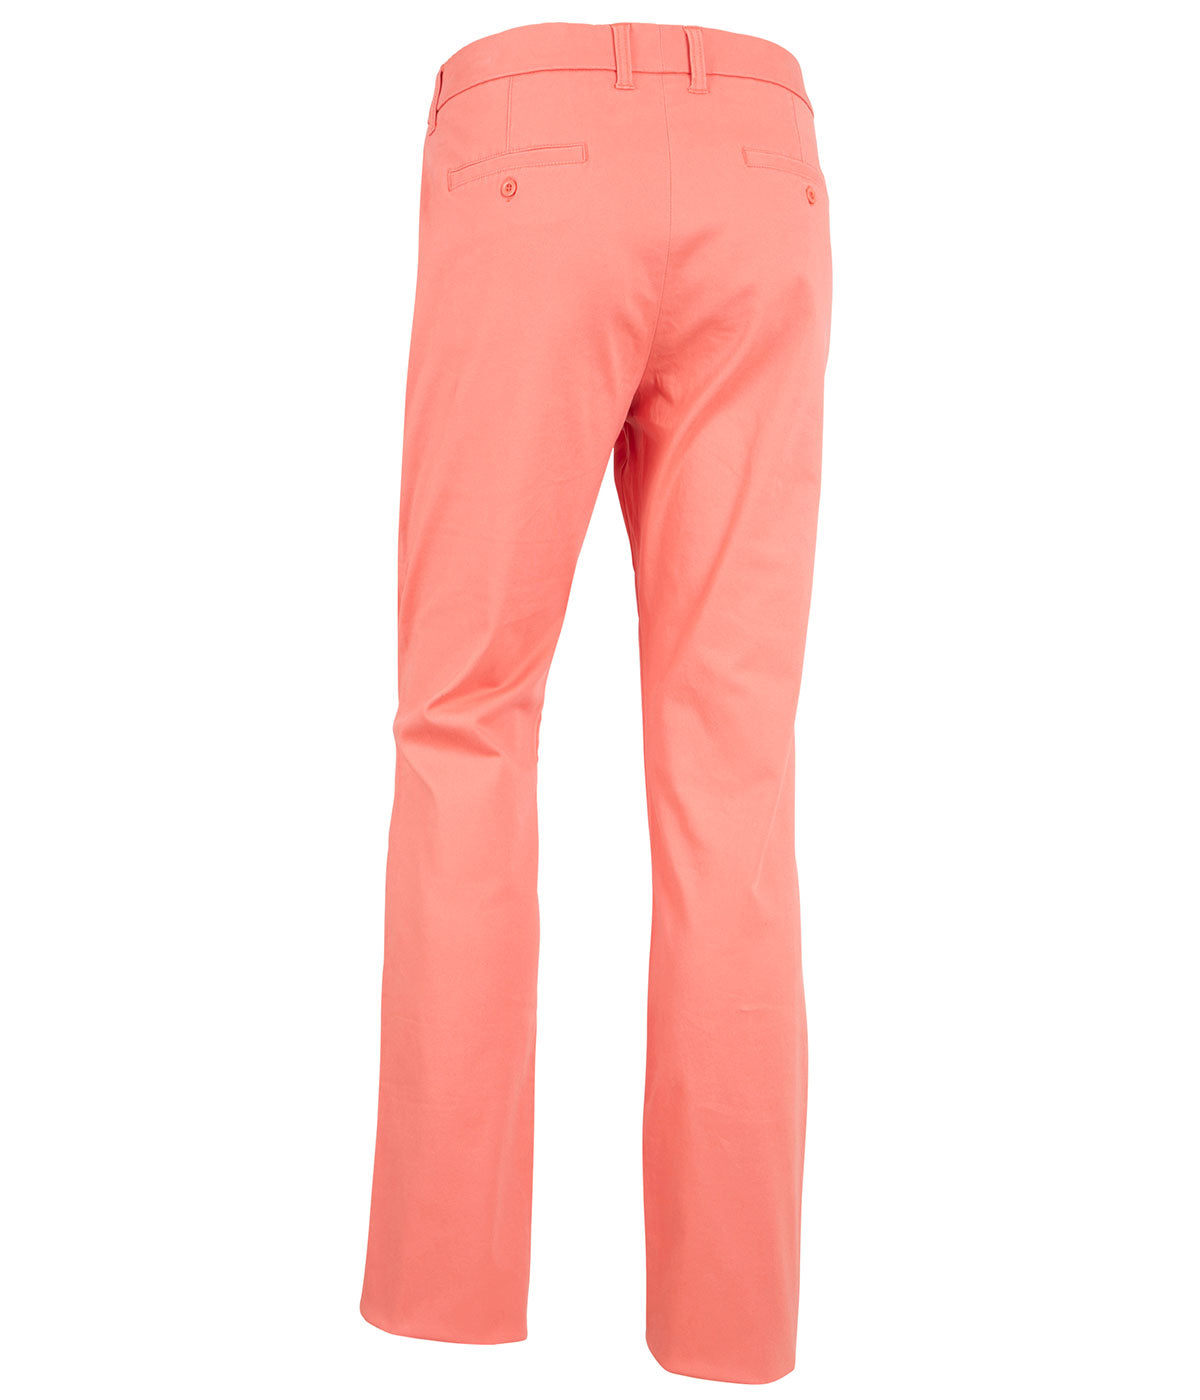 St. Charles 2.0 Brushed Cotton Stretch Dress Pants